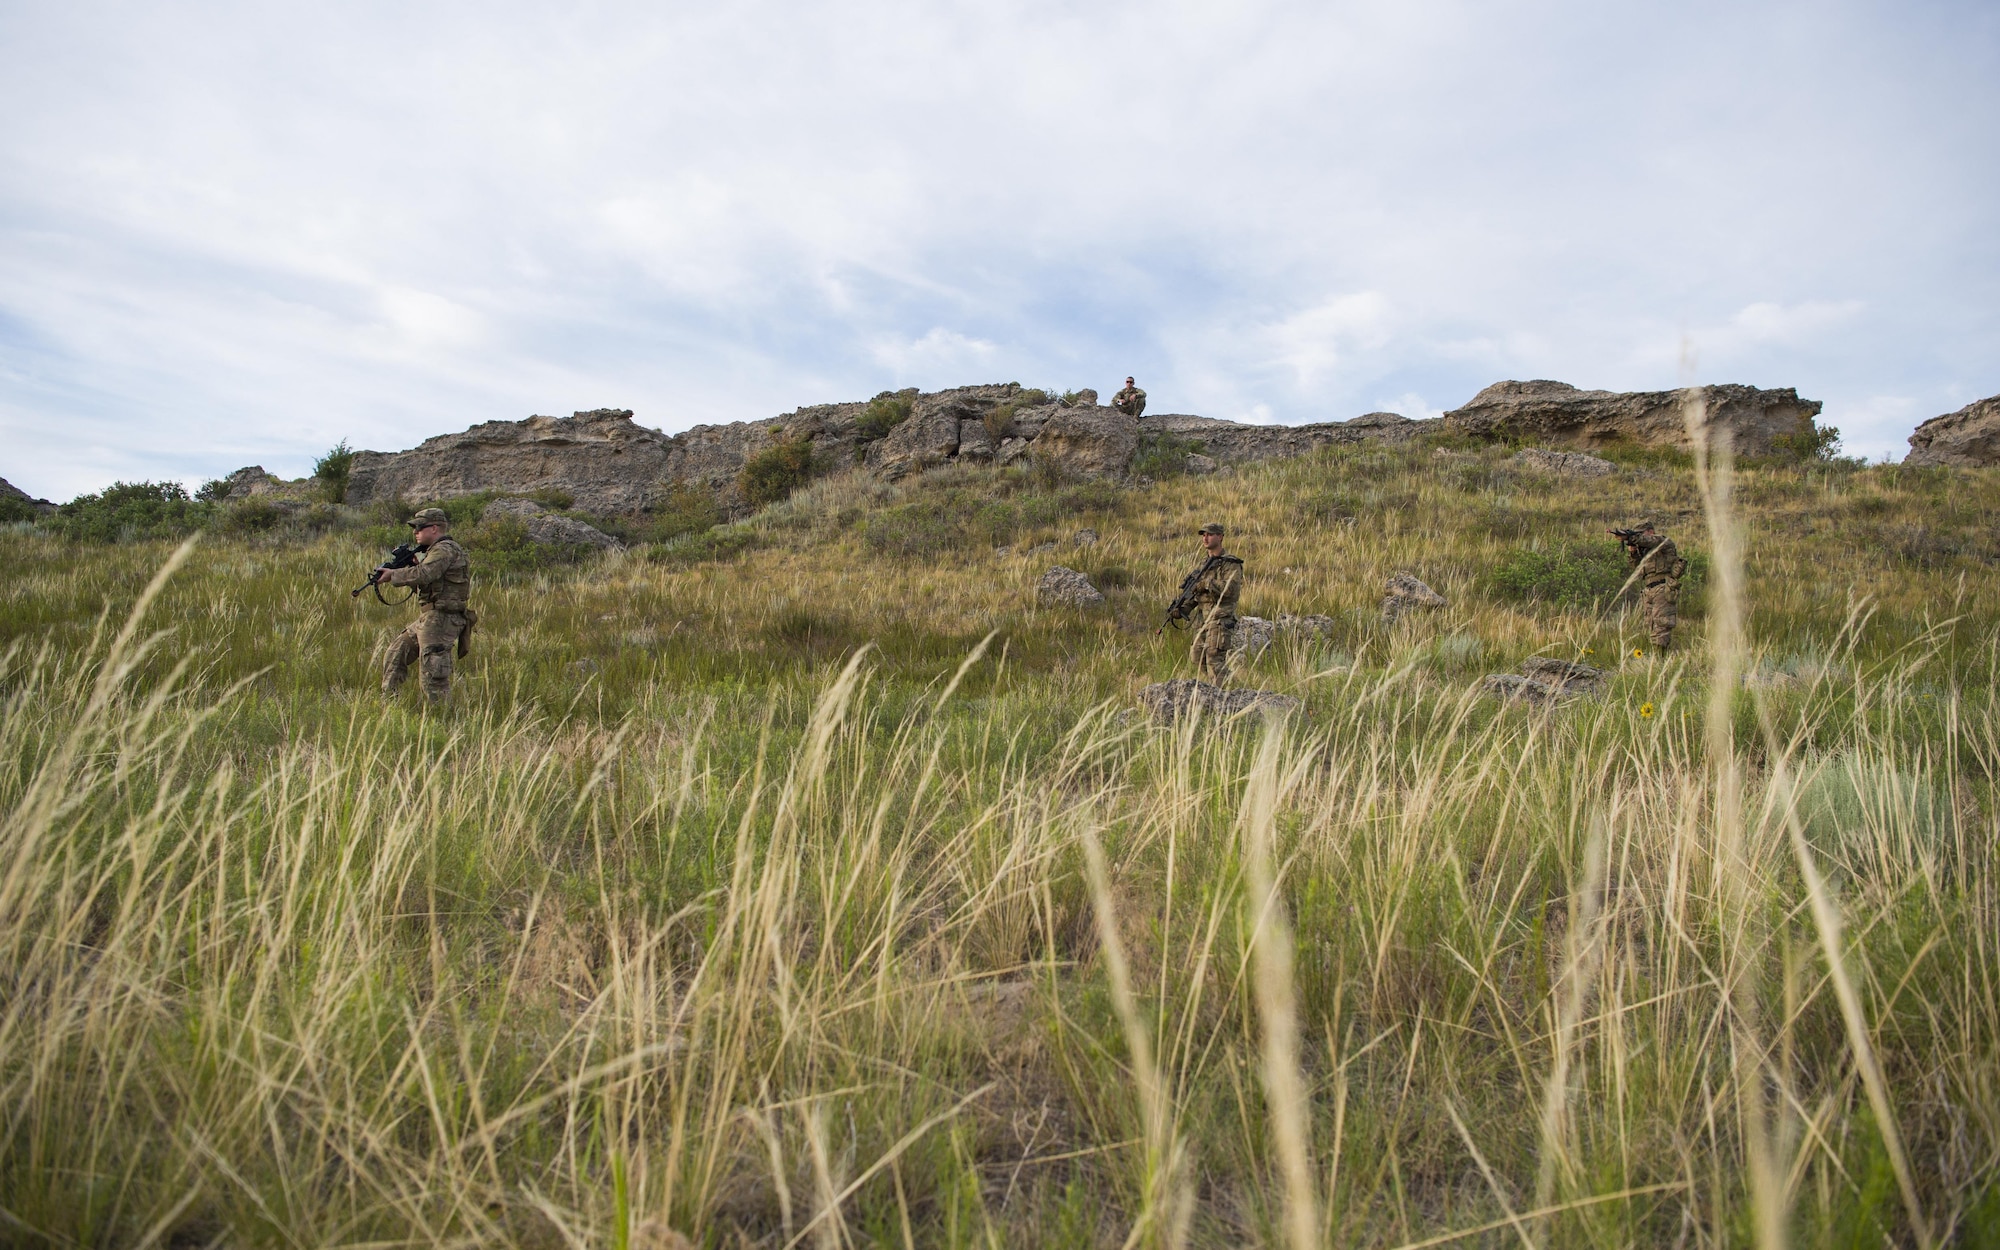 Defenders from Minot Air Force Base’s 791st Missile Security Forces Squadron, sweep the area for improvised explosive devices during a counter IED course at Camp Guernsey, Wyo., July 19, 2017. The 620th Ground Combat Training Squadron offers multiple counter IED course’s placing the defenders in multiple scenarios where they need to avoid or locate the IED’s while simultaneously completing their primary mission. (U.S. Air Force photo by Staff Sgt. Christopher Ruano)

